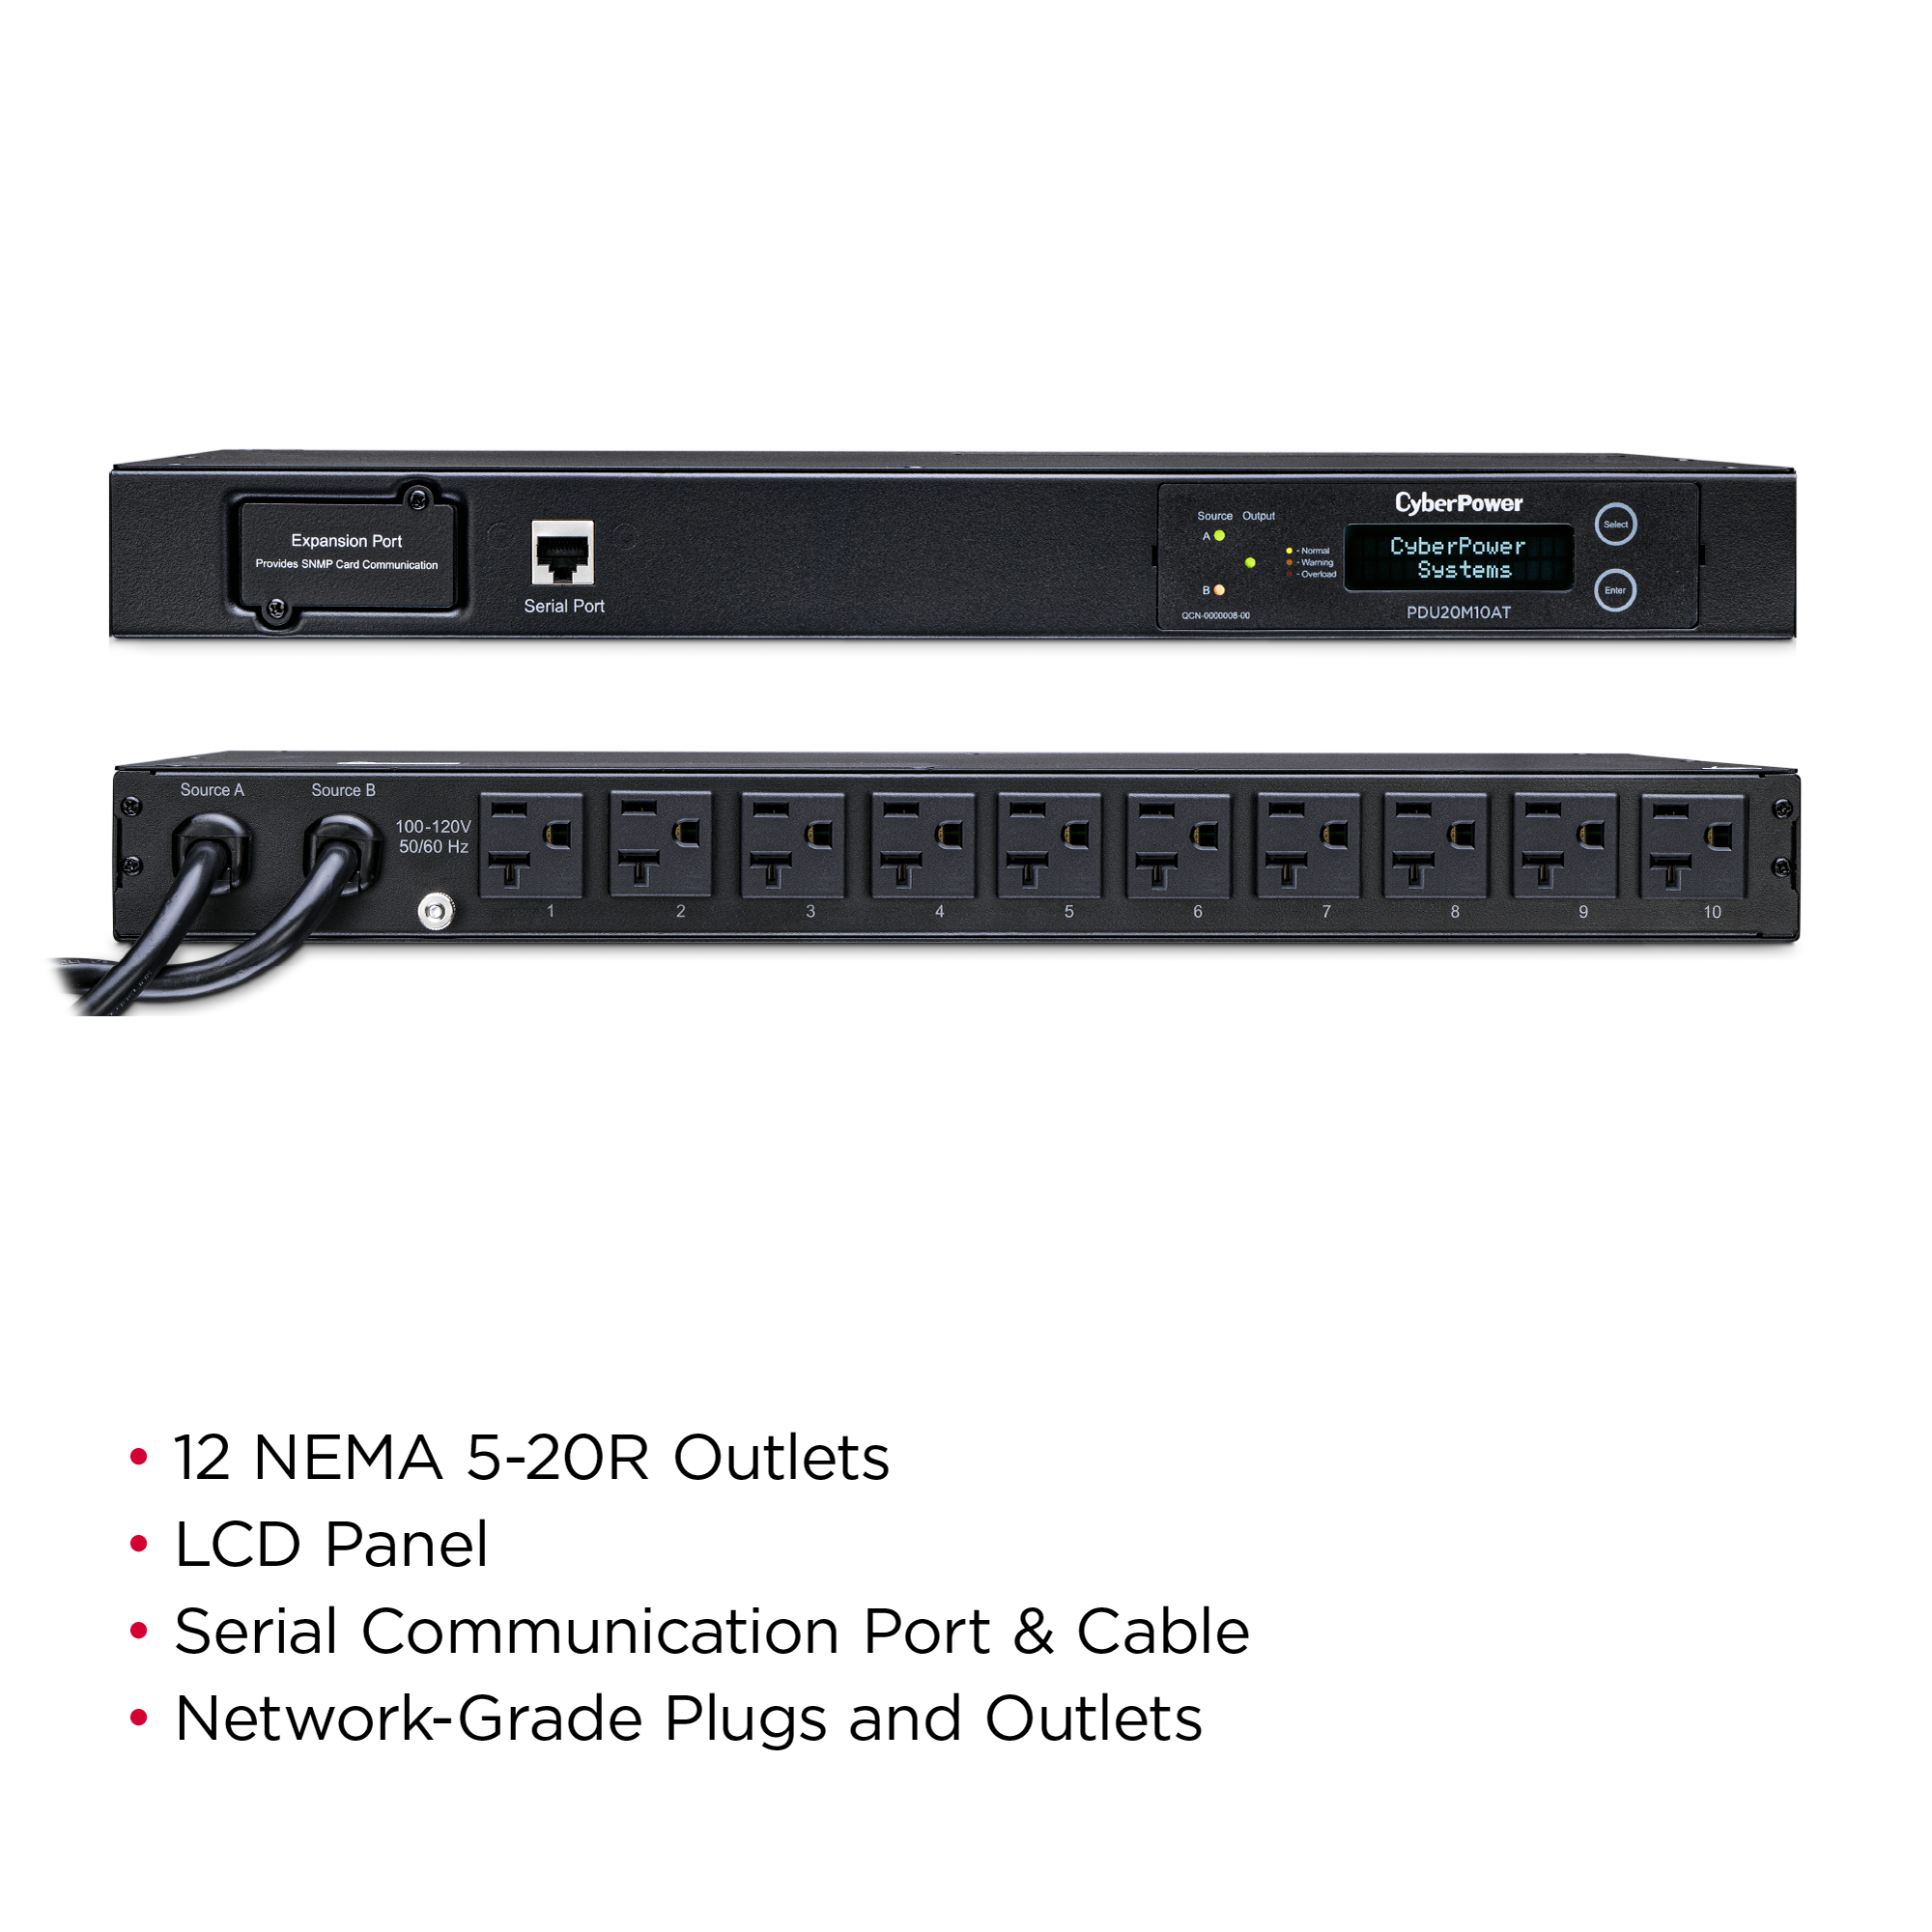 CyberPower PDU20MT10AT Metered ATS PDU 10 Outlets 1U Rackmount 100-120V/20A 